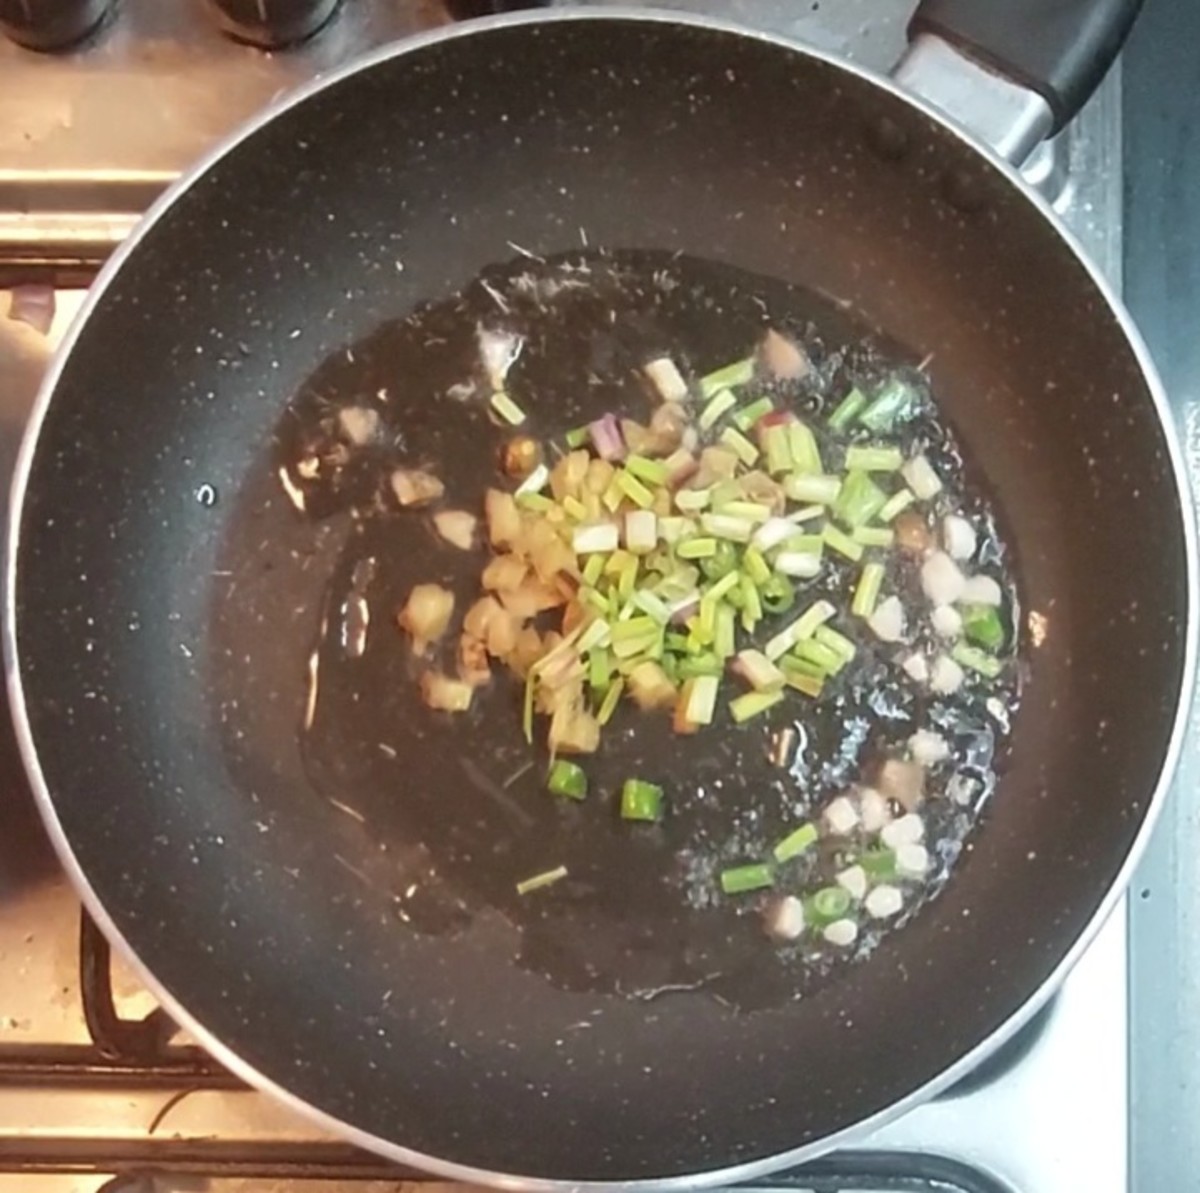 In the same pan, heat 1 tablespoon oil, 1 spoon chopped ginger, 5-6 chopped garlic, 1-2 green chilies, and 1 tablespoon spring onion. Fry well.